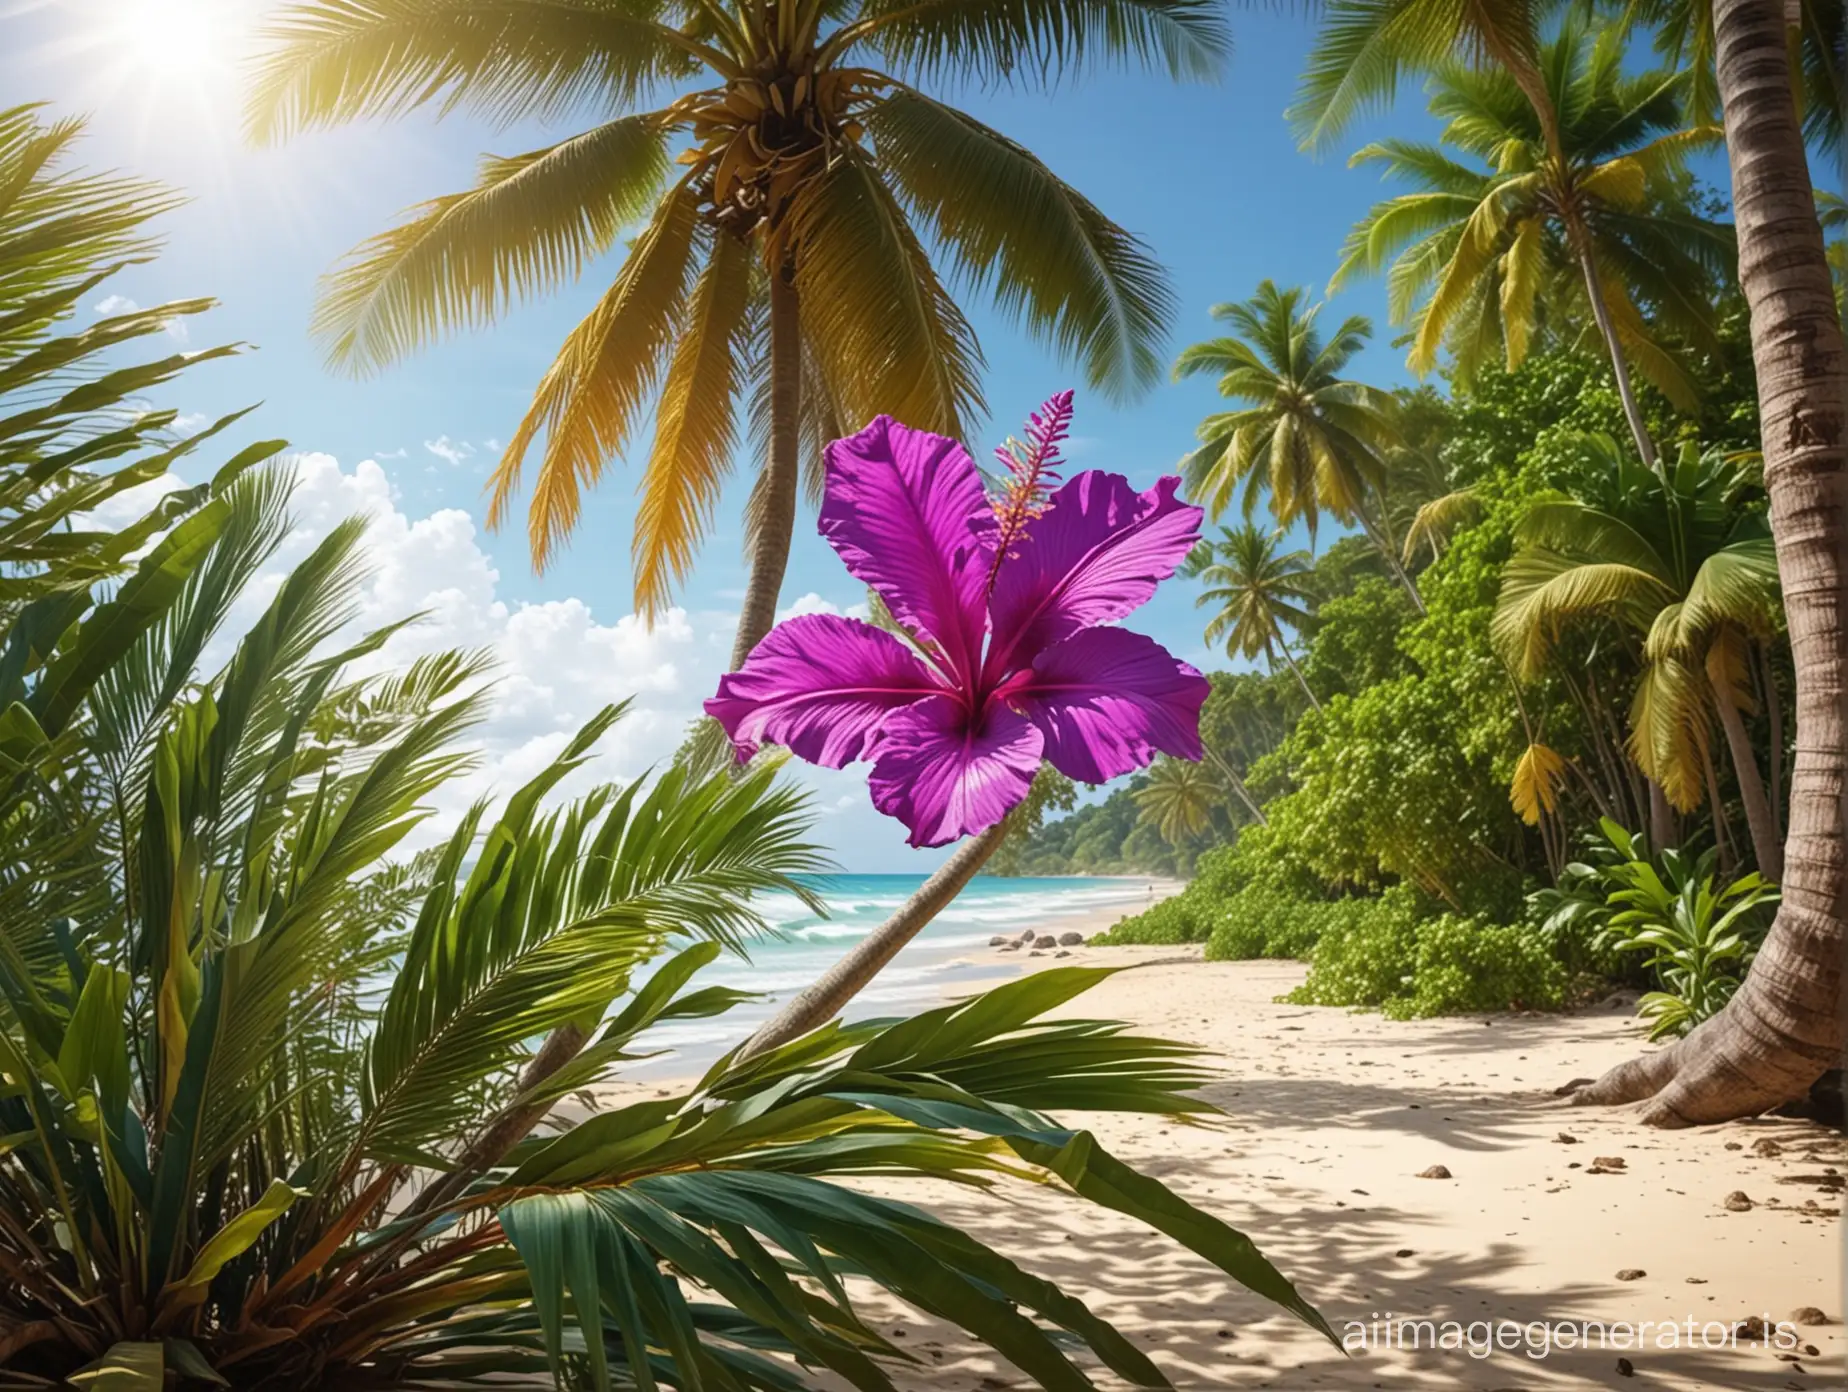 Vibrant-Tropical-Beach-Landscape-with-Coconut-Tree-and-Purple-Flowers-on-a-Sunny-Day